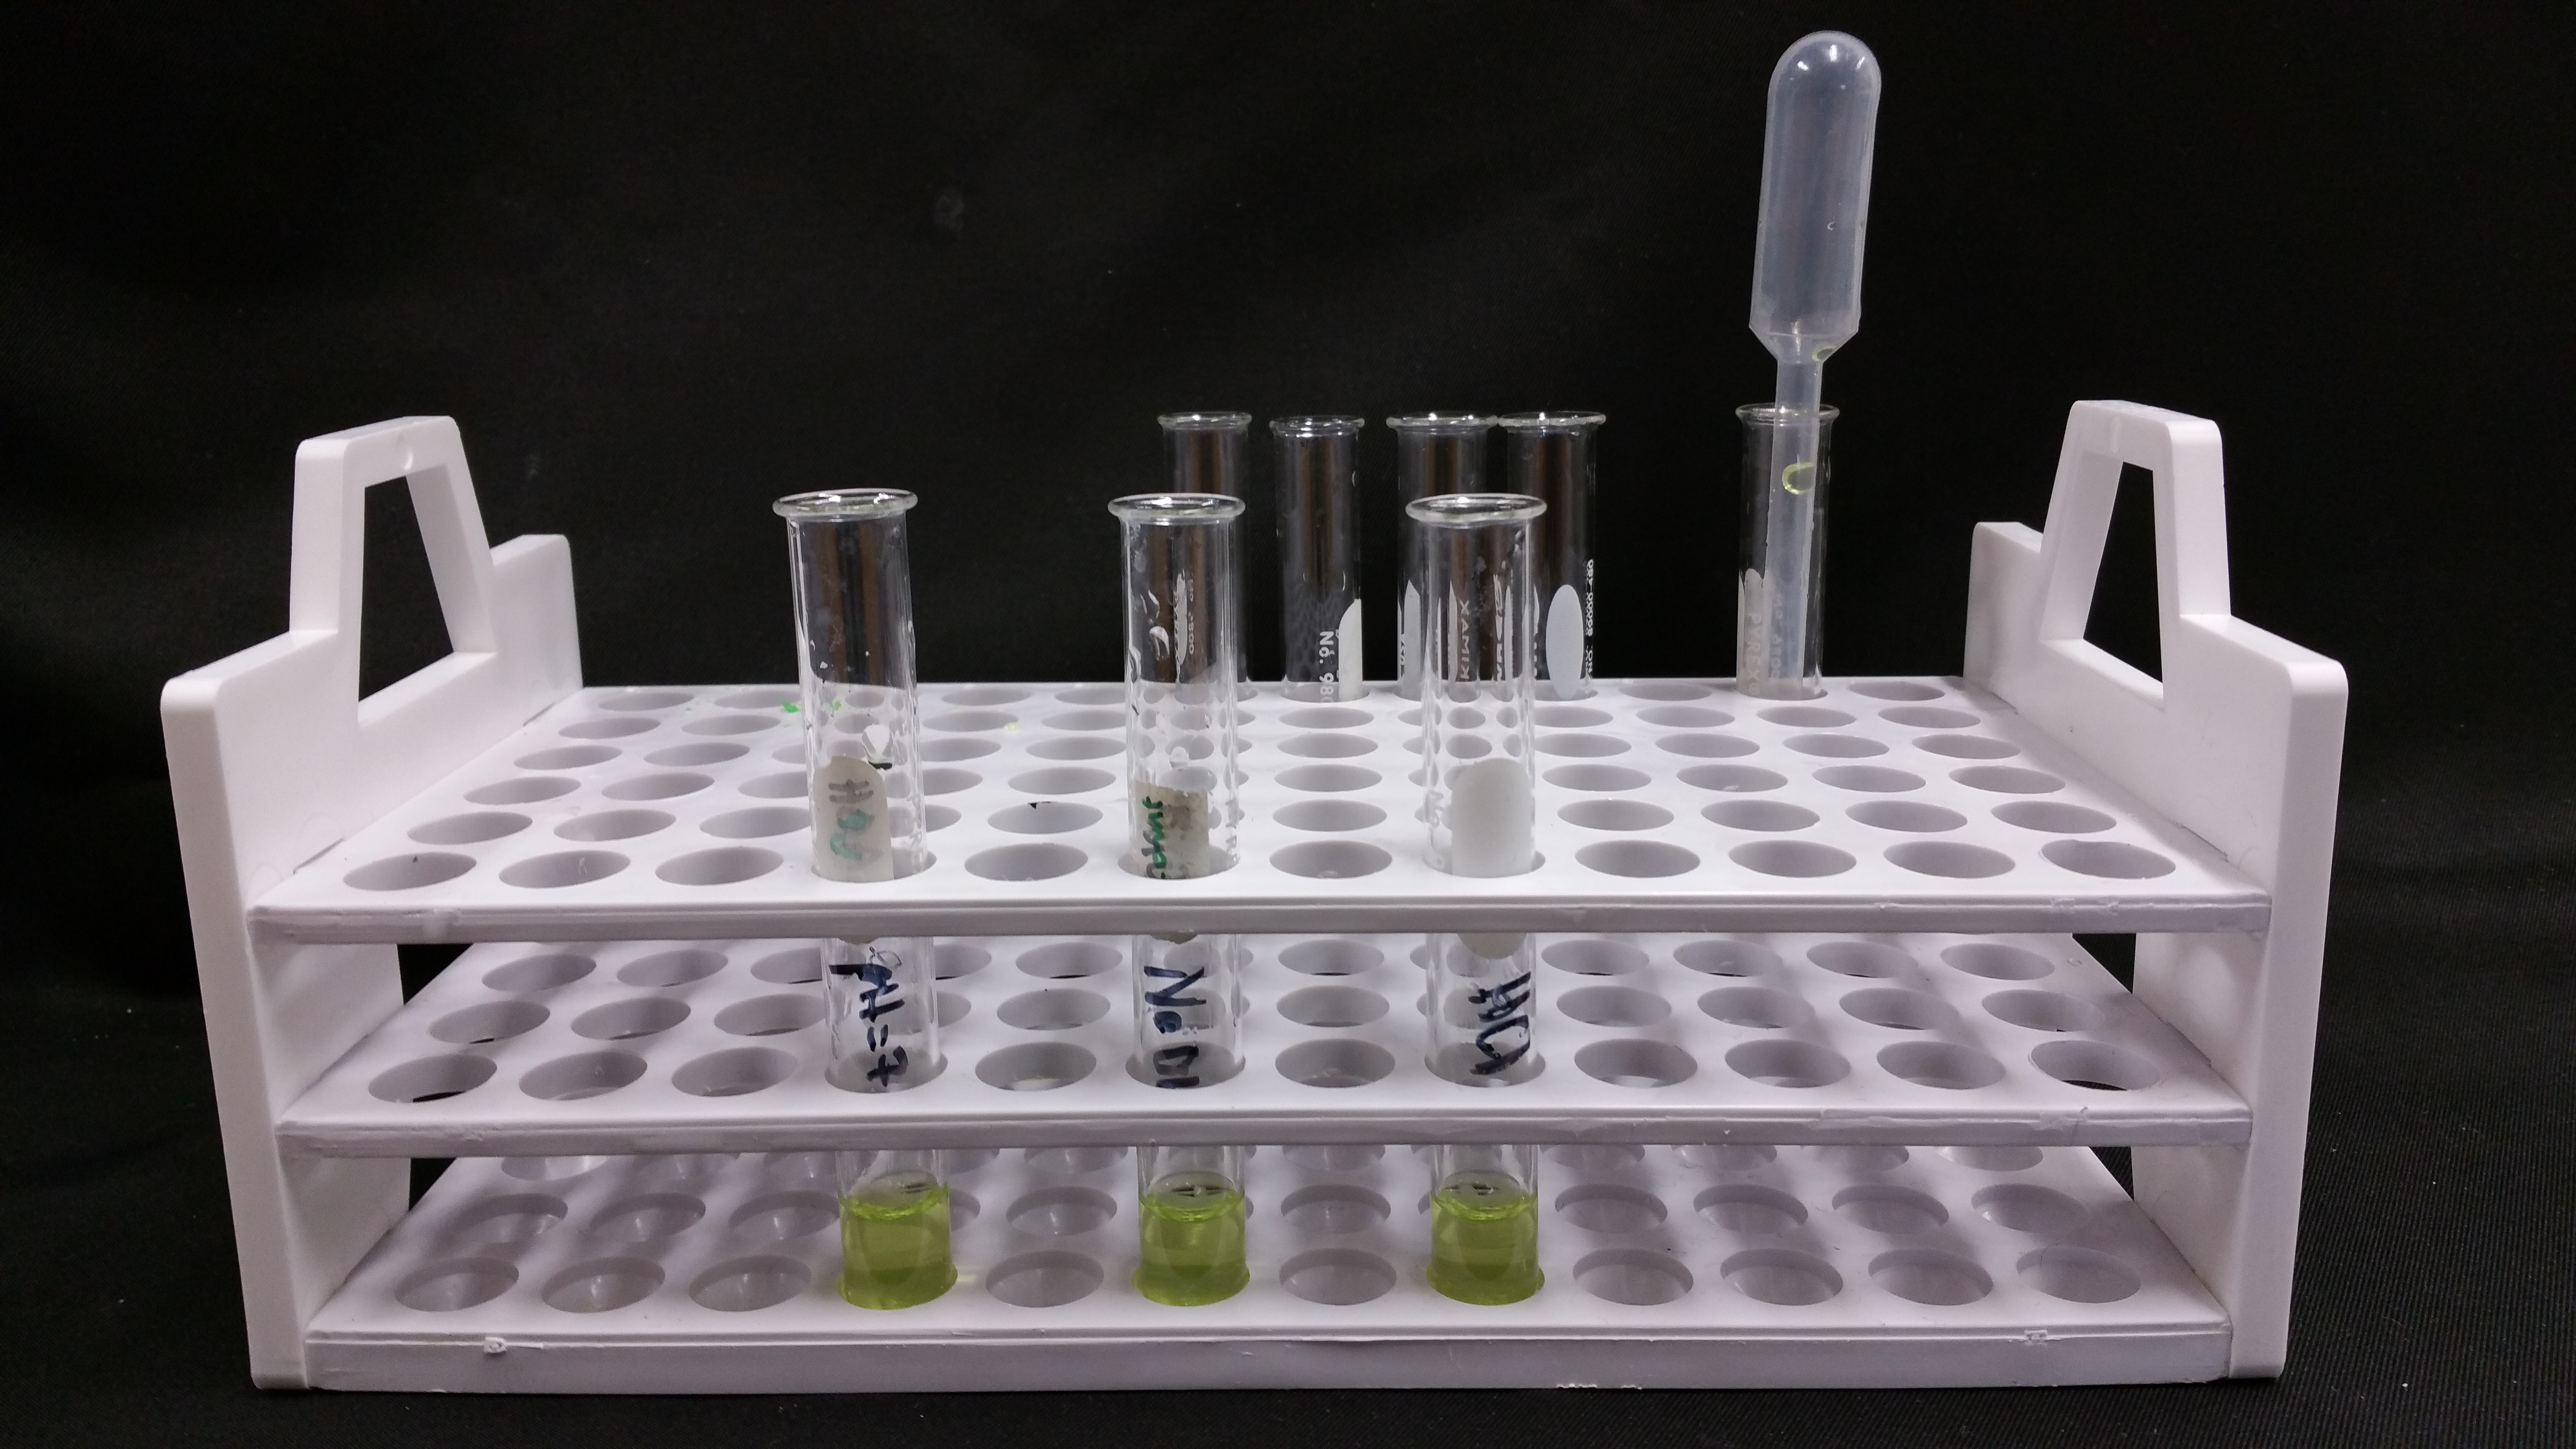 Test tube rack with multiple test tubes showing different reaction products. 